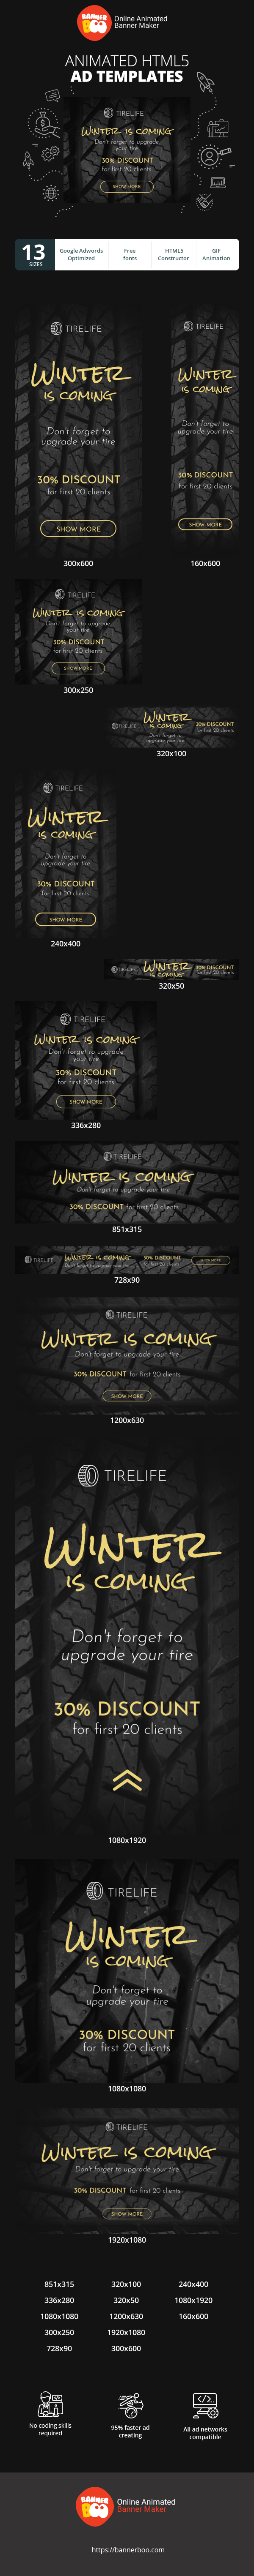 Banner ad template — Winter is coming — Don't Forget To Upgrade Your Tire 30% Discount